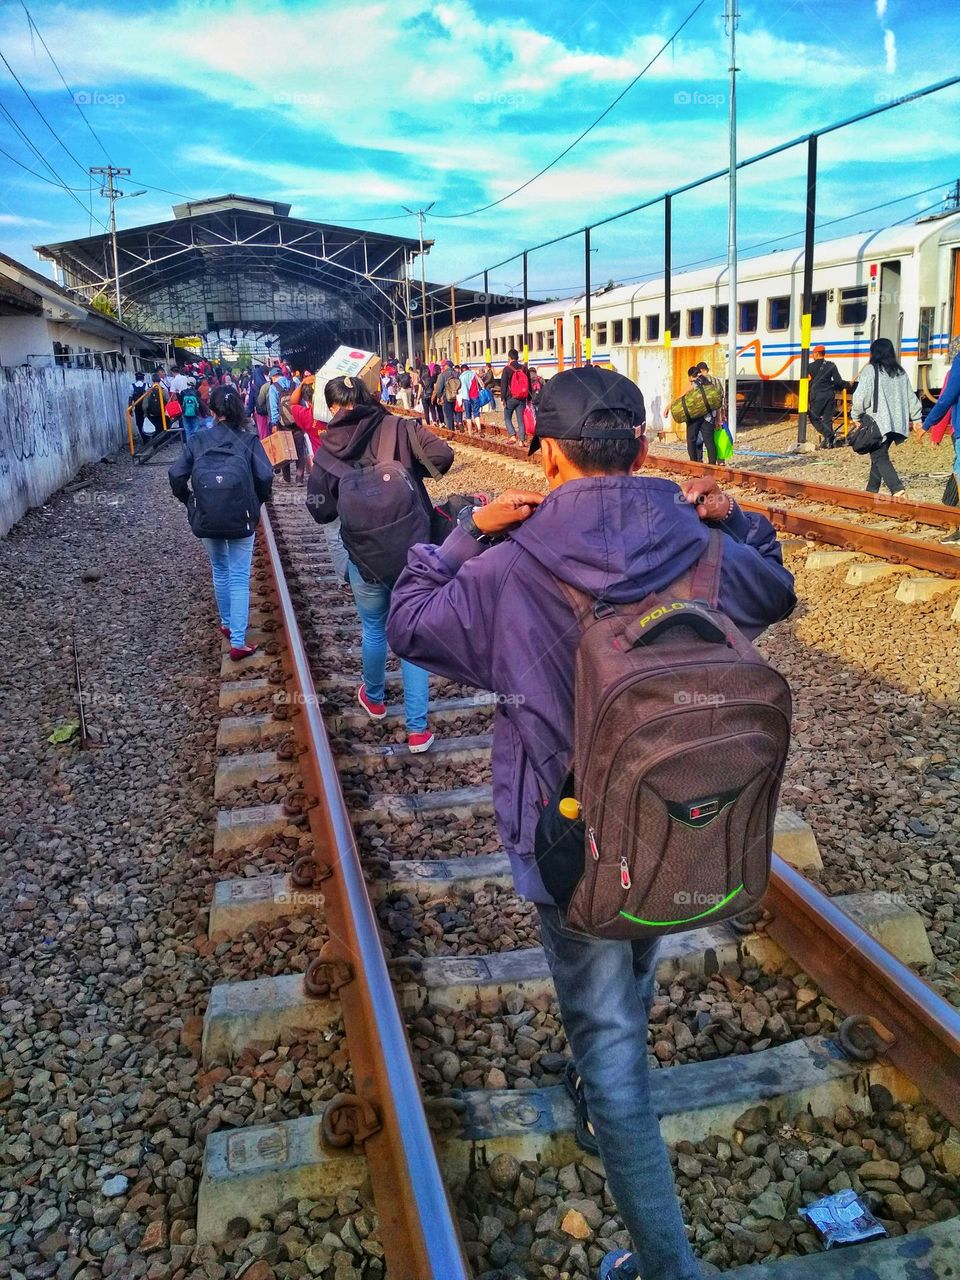 Train passengers walking on the tracks towards the exit